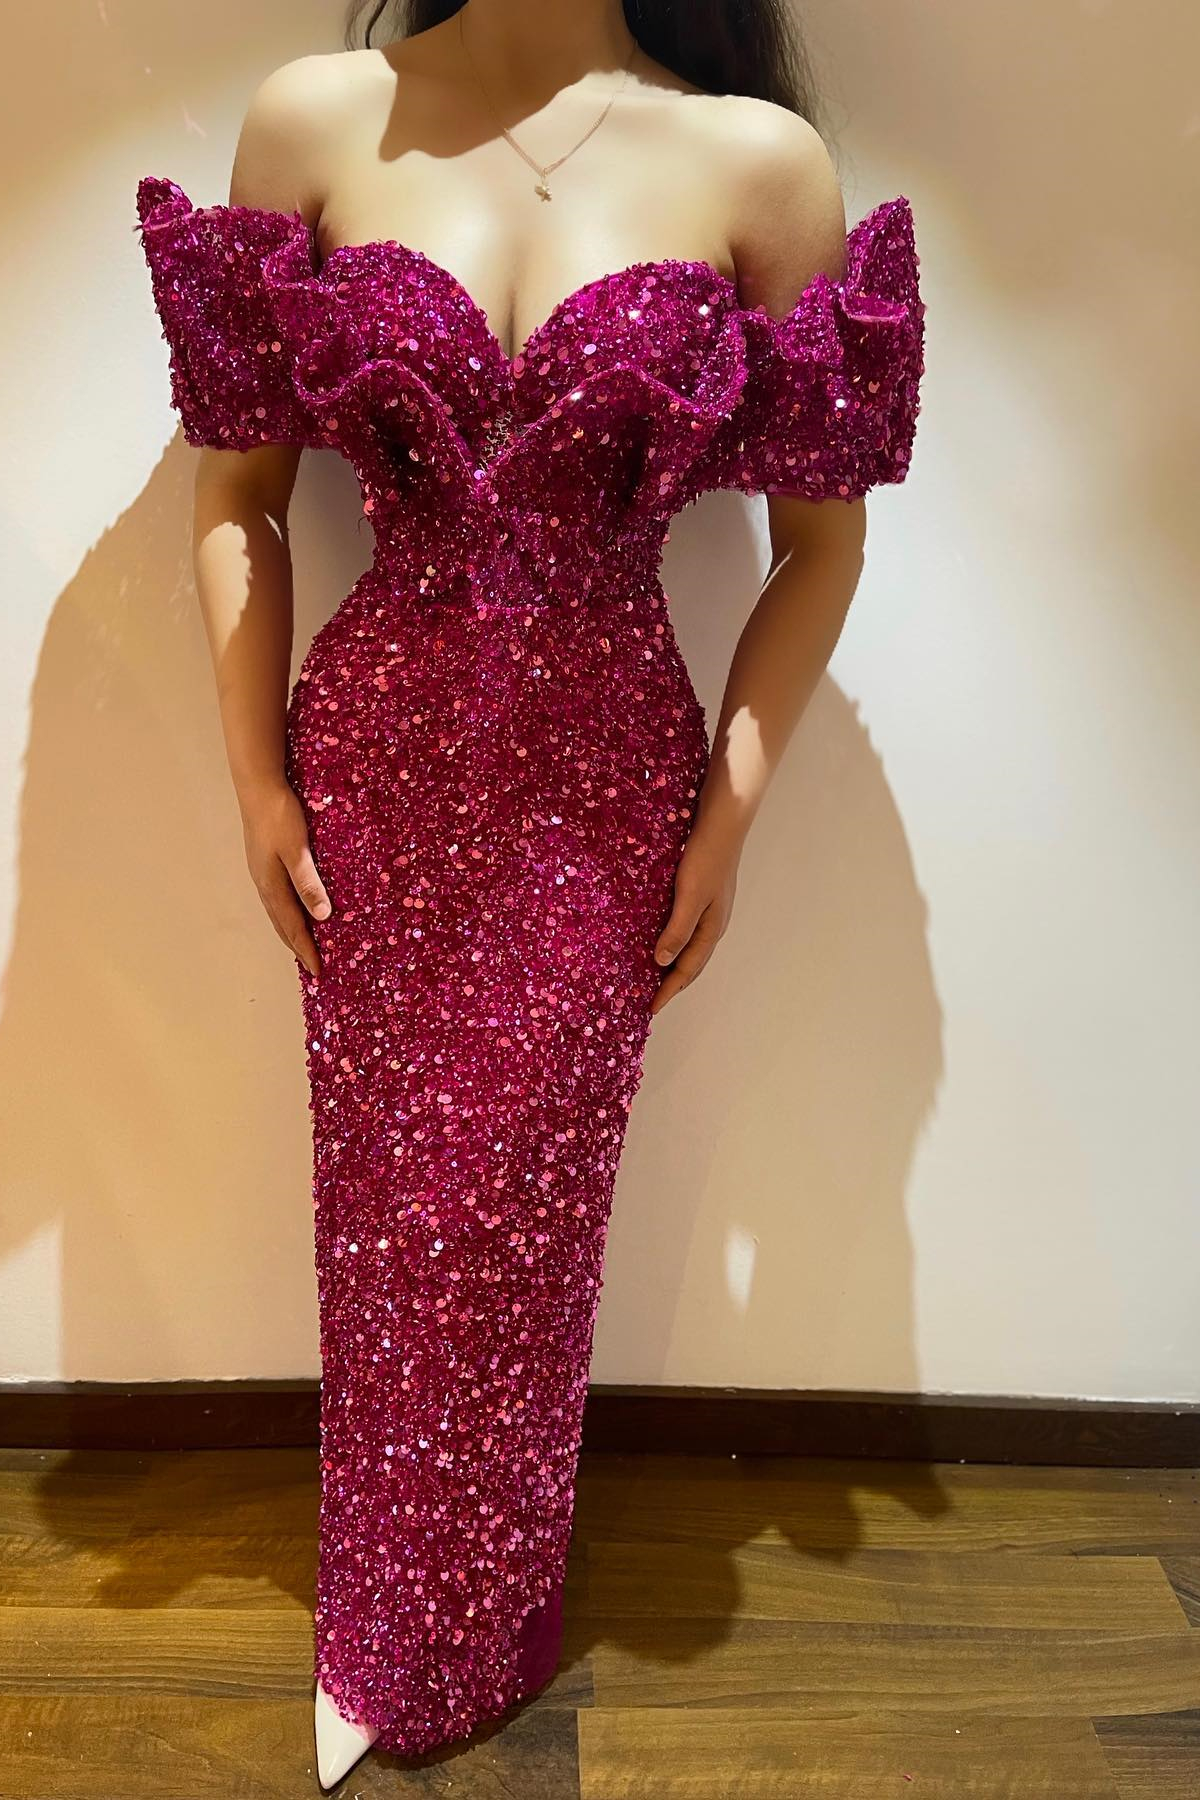 New Arrival Fuchsia Off-The-Shoulder Sweetheart Mermaid Prom Dress With Sequins - lulusllly